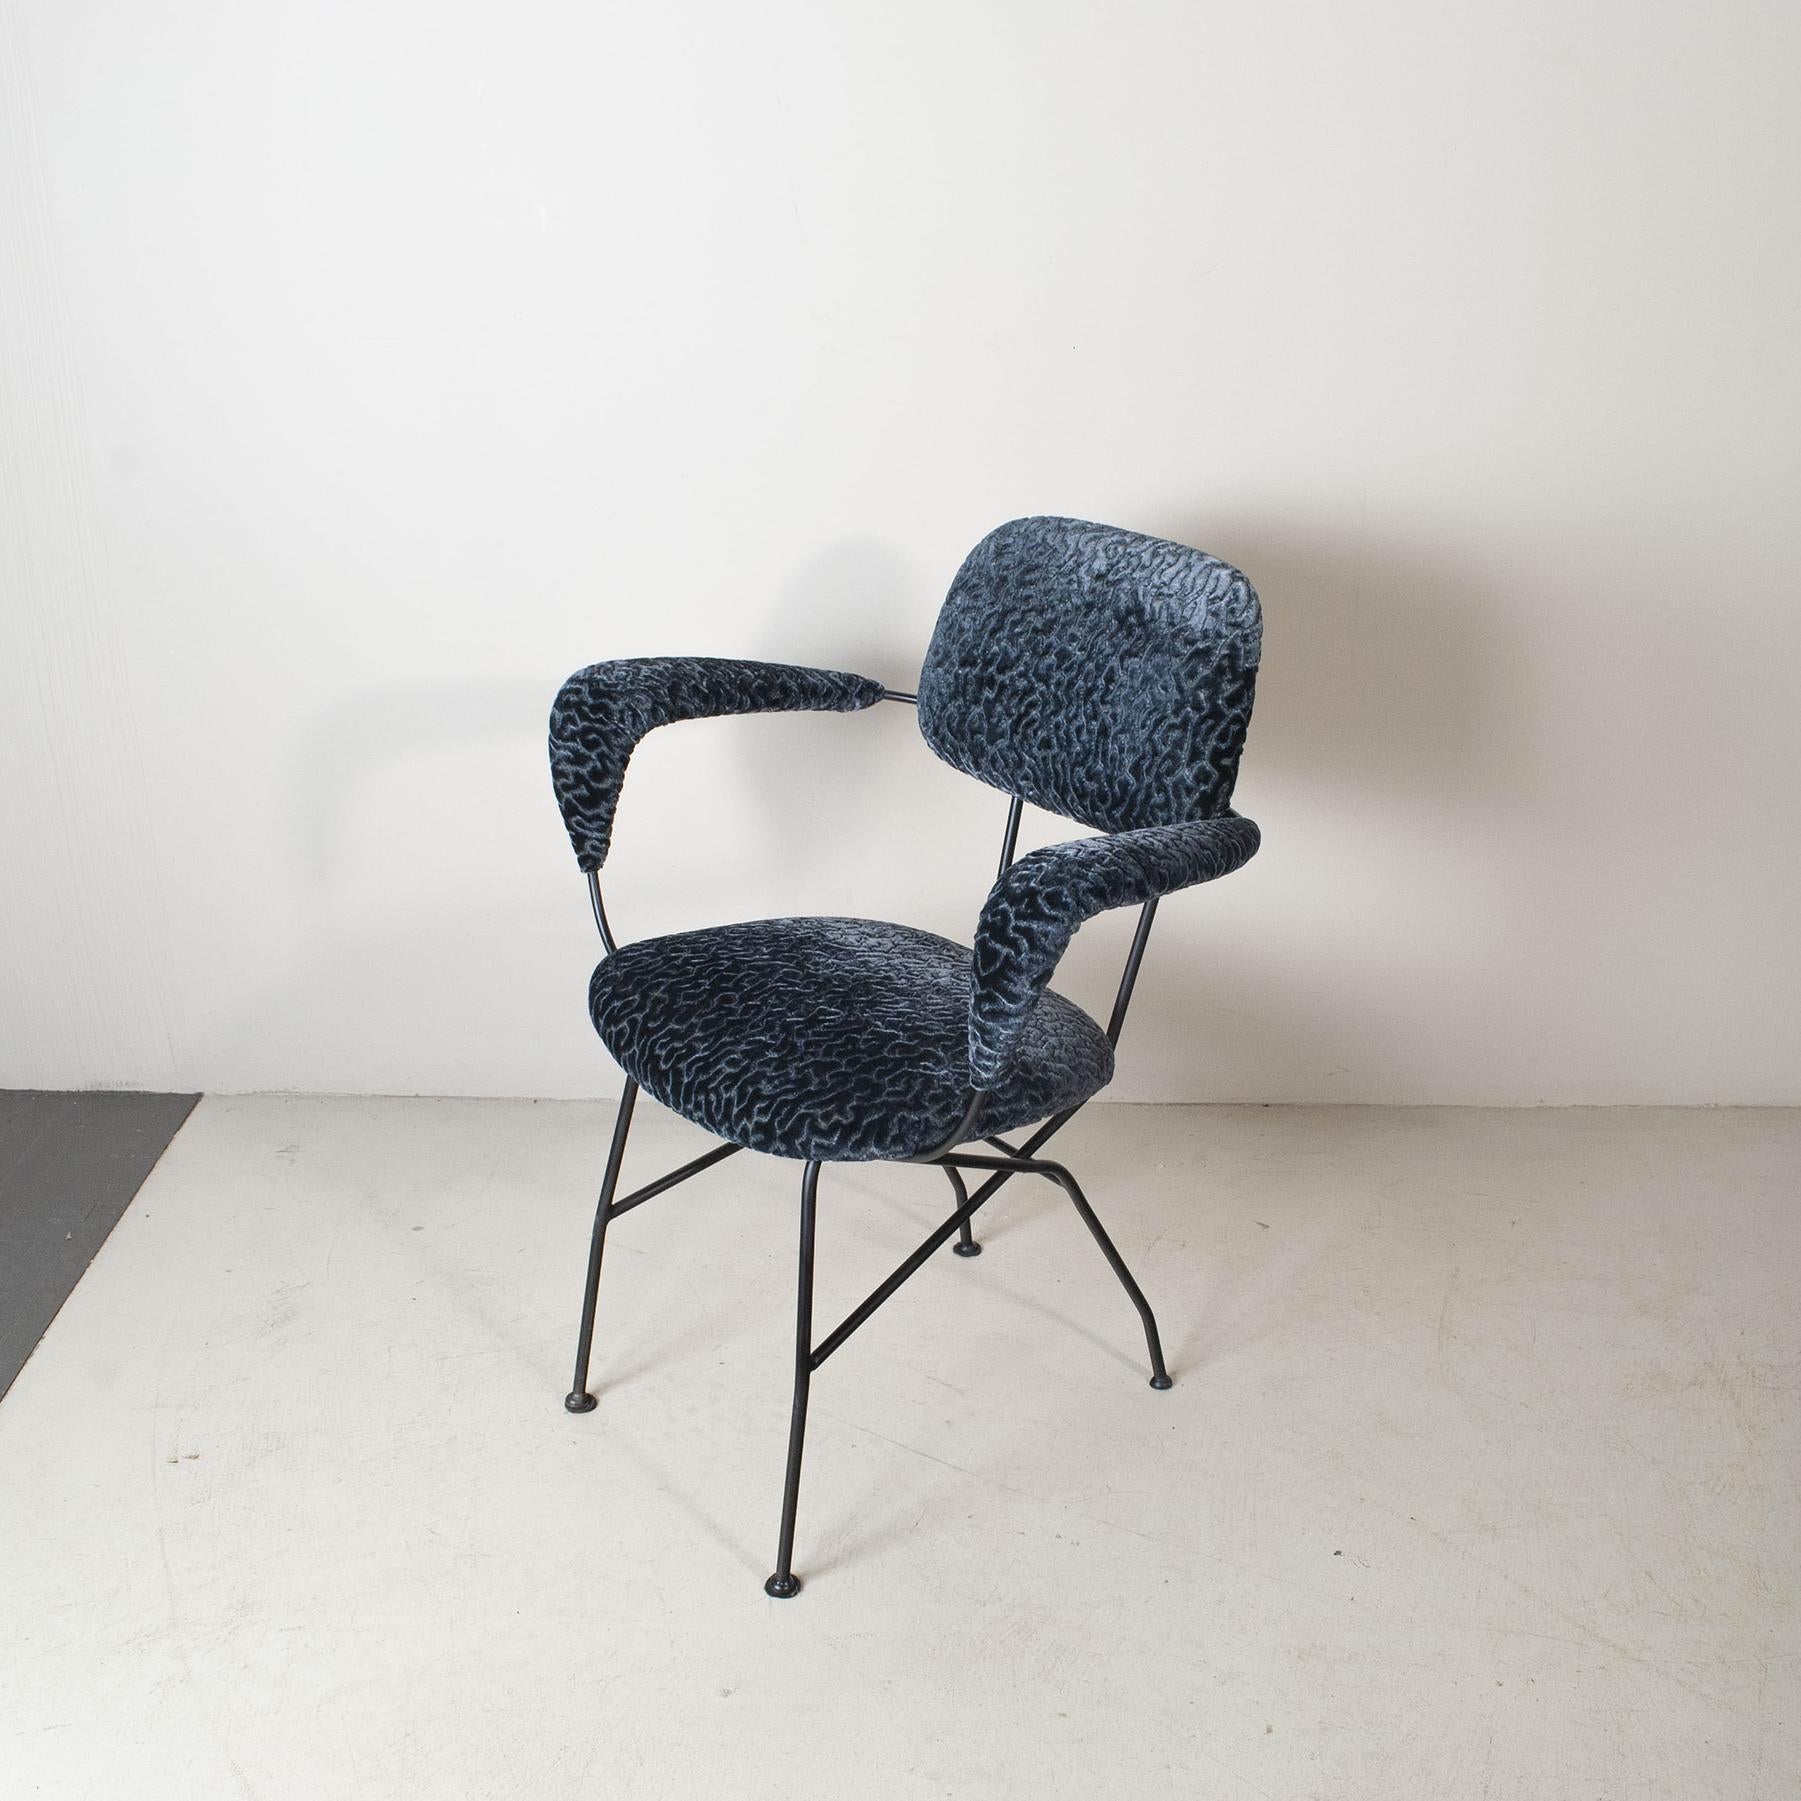 Beautiful chair with machined and curved metal frame Designer Gastone Rinaldi for Rima 1950’s

Gastone Rinaldi was born in Padua in 1920, and graduated in accountancy from the Belzoni Institute. Initially he worked for the Rima company in Via Guido